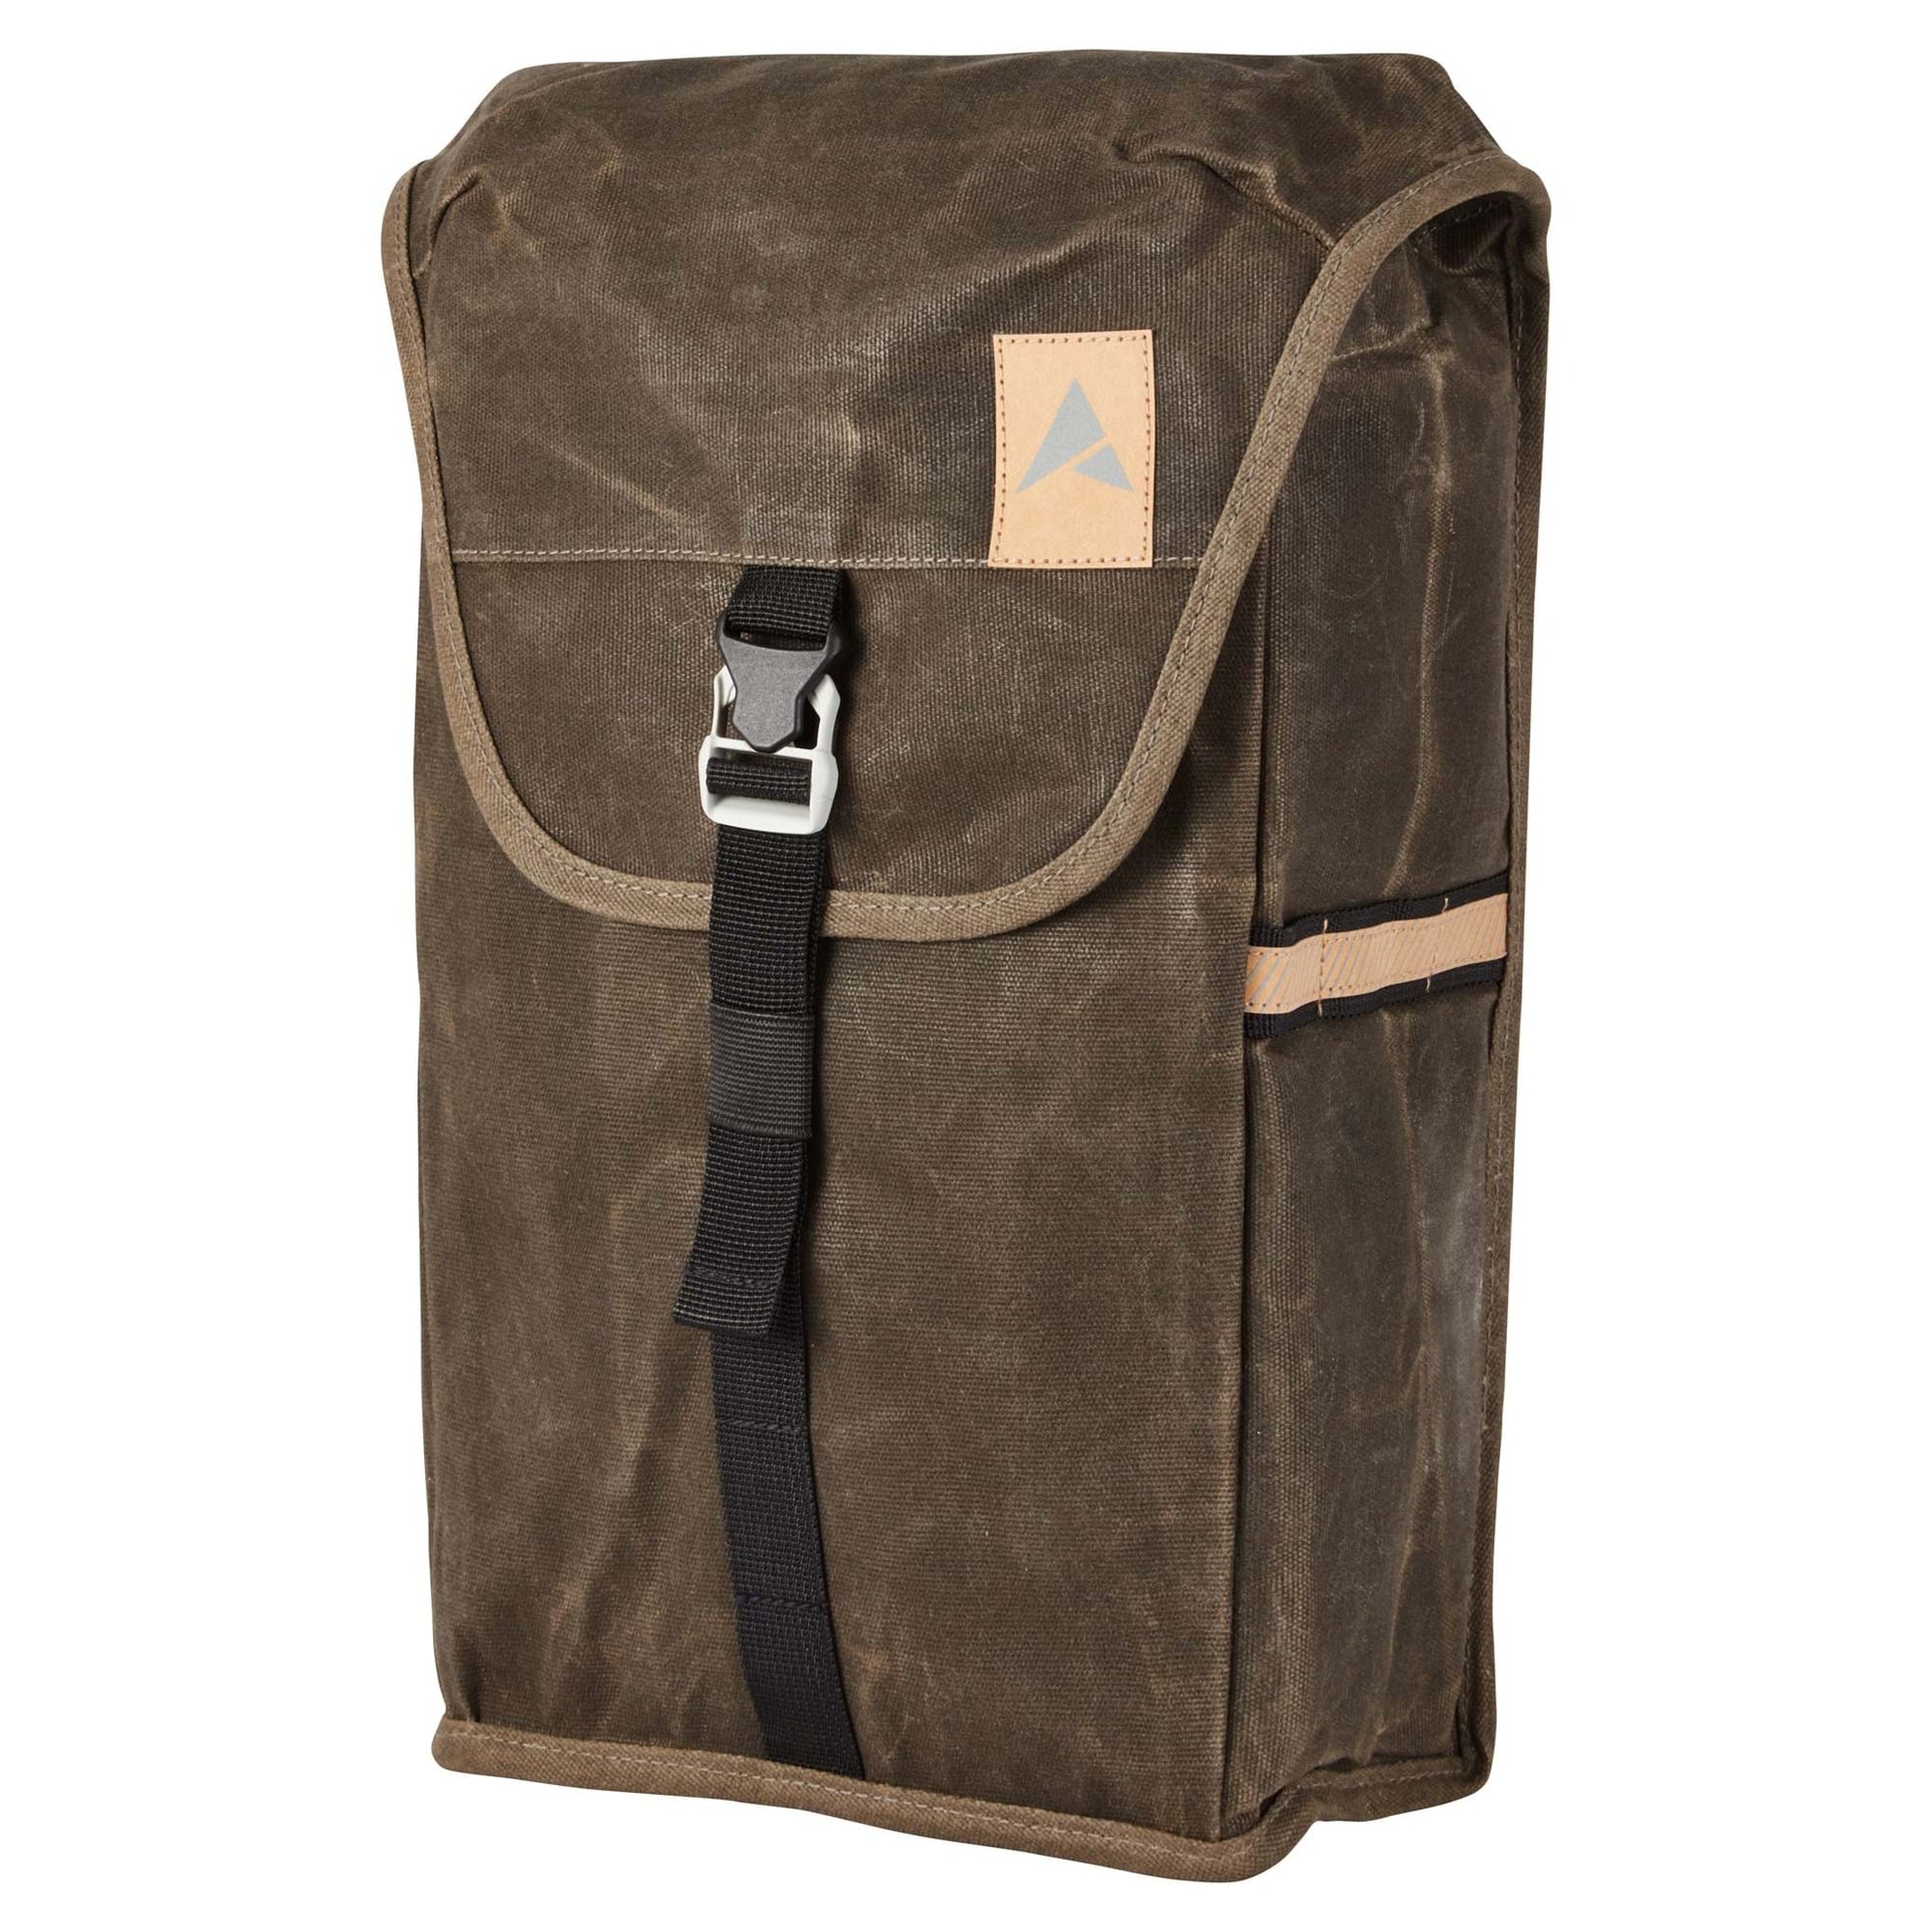 ALTURA HERITAGE 16L CYCLING PANNIER - OLIVE